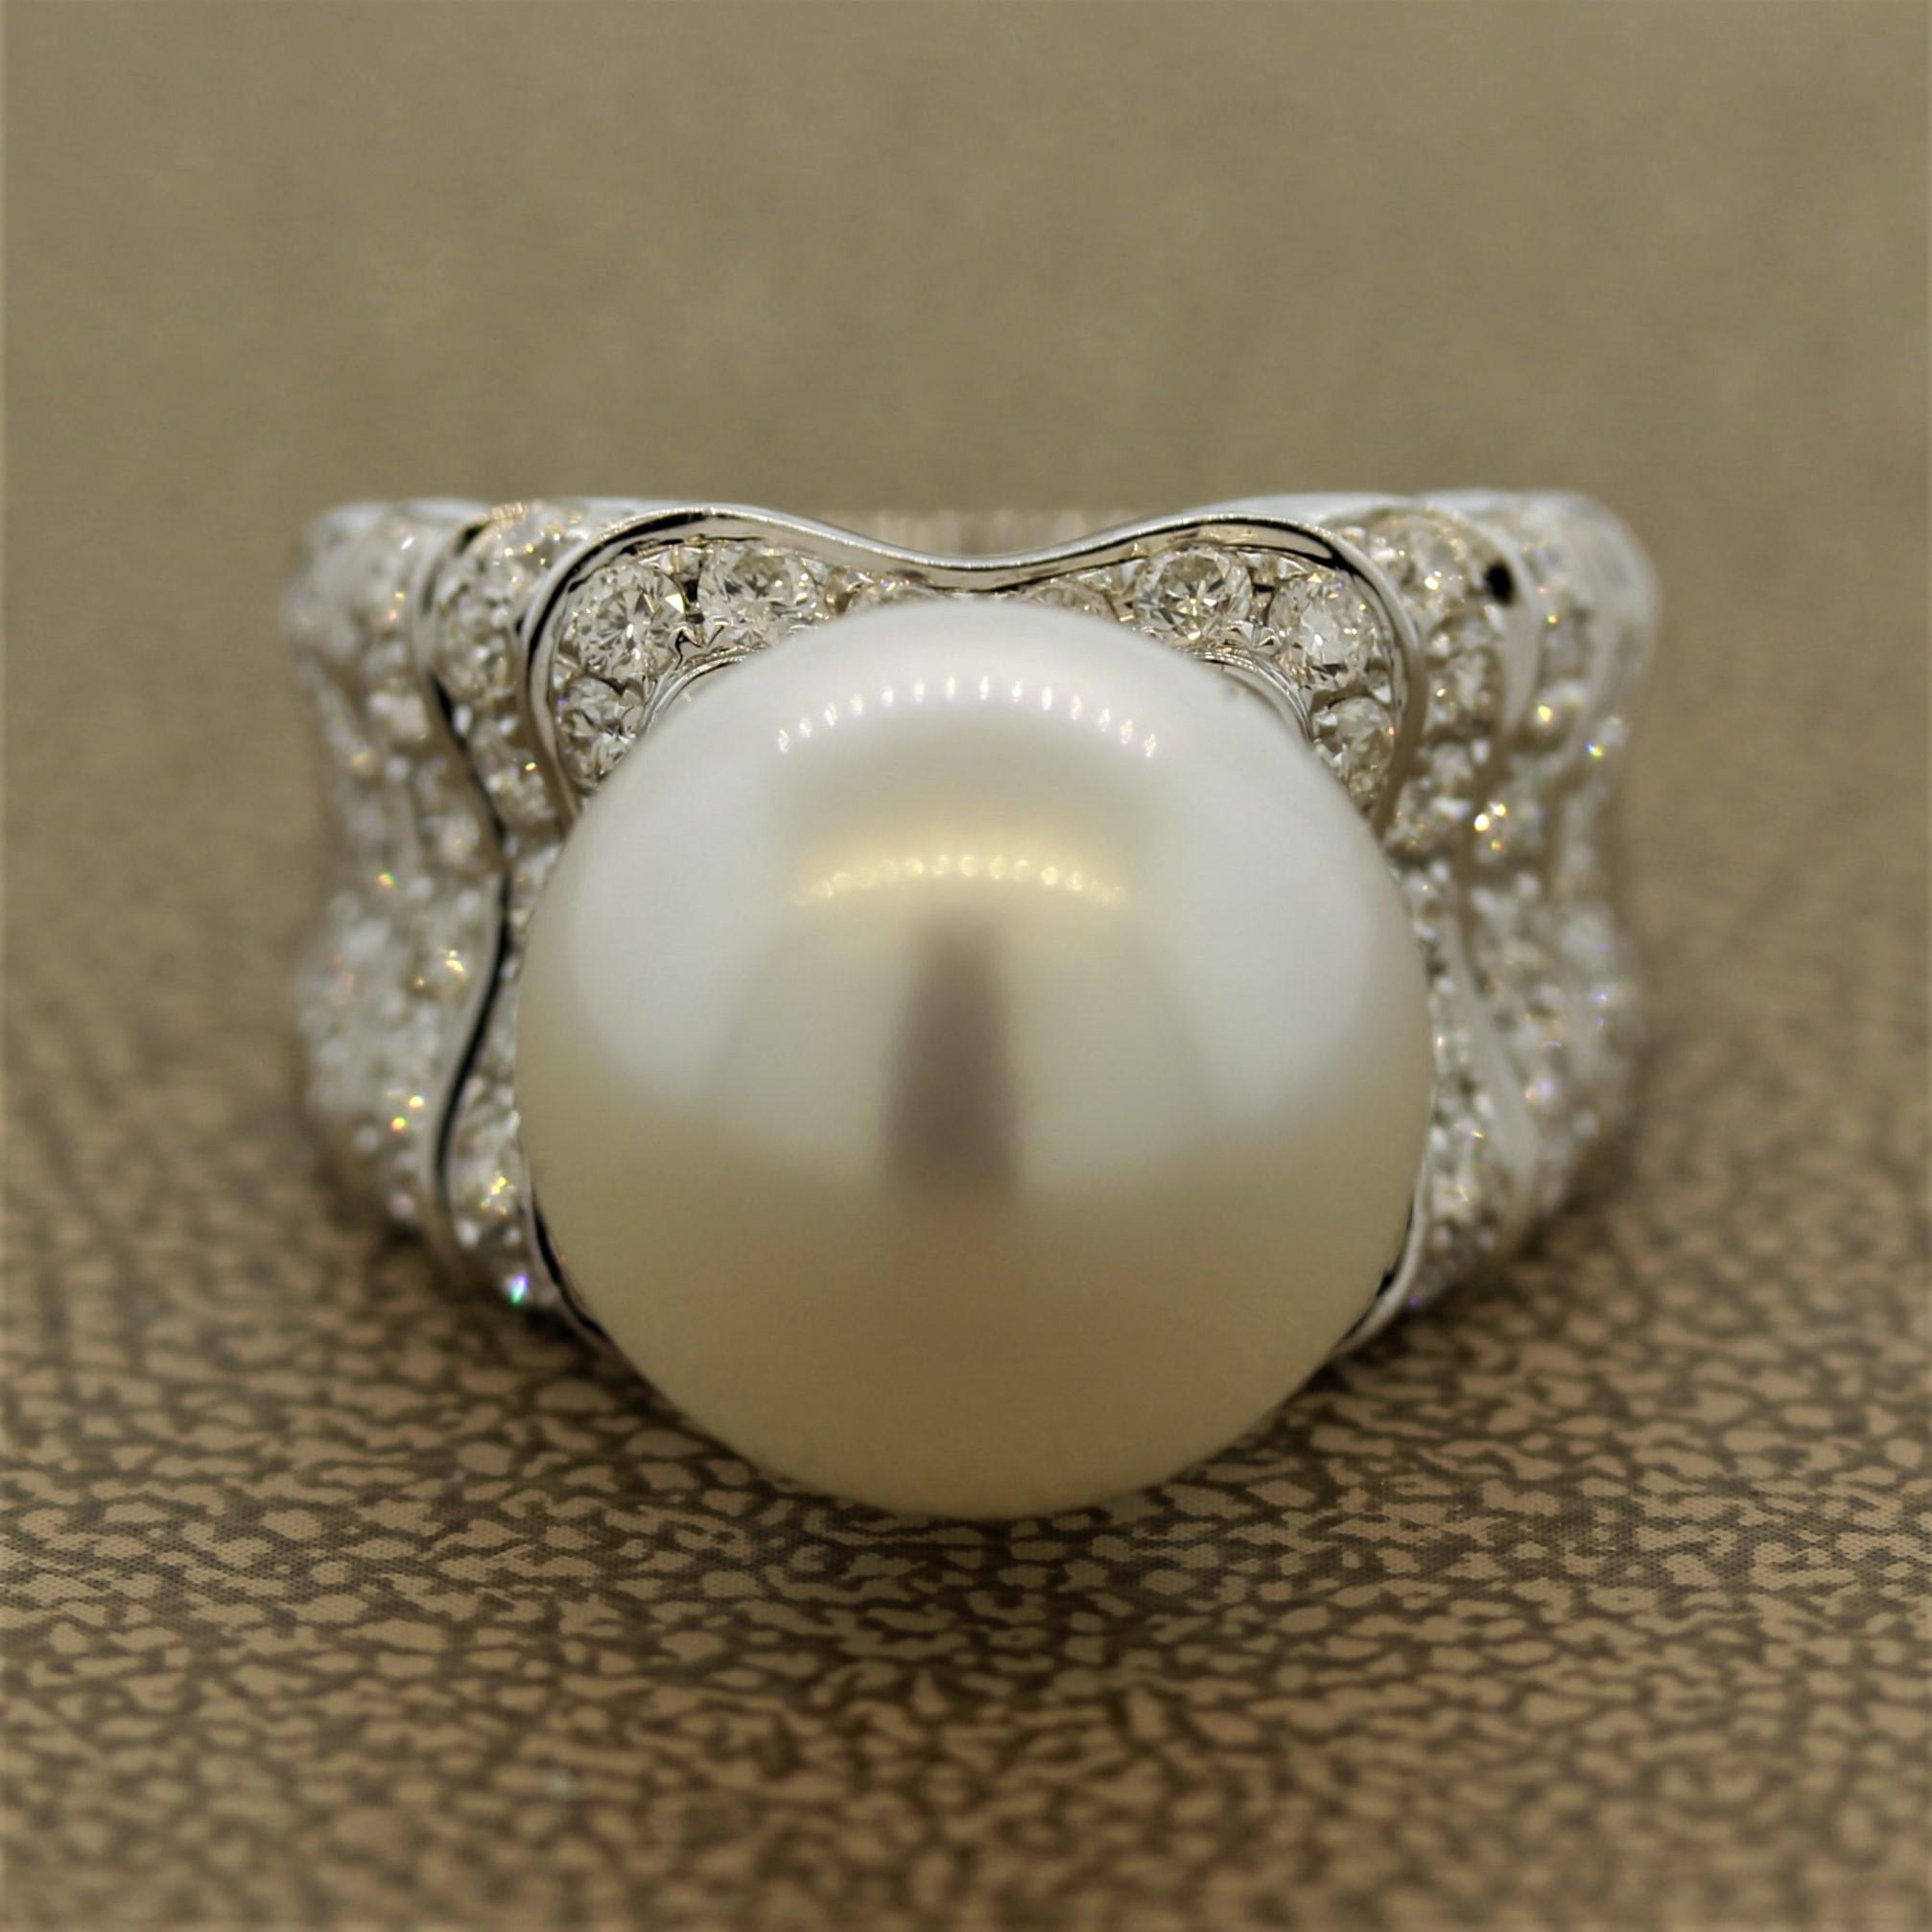 You can't be mistaken for this stunning piece, whether it's a gift for someone very special or for you to wear and dazzle your friends on all occasions.

This ring features a 14.00mm South  Pearl that came from the depths of the South Sea. It is